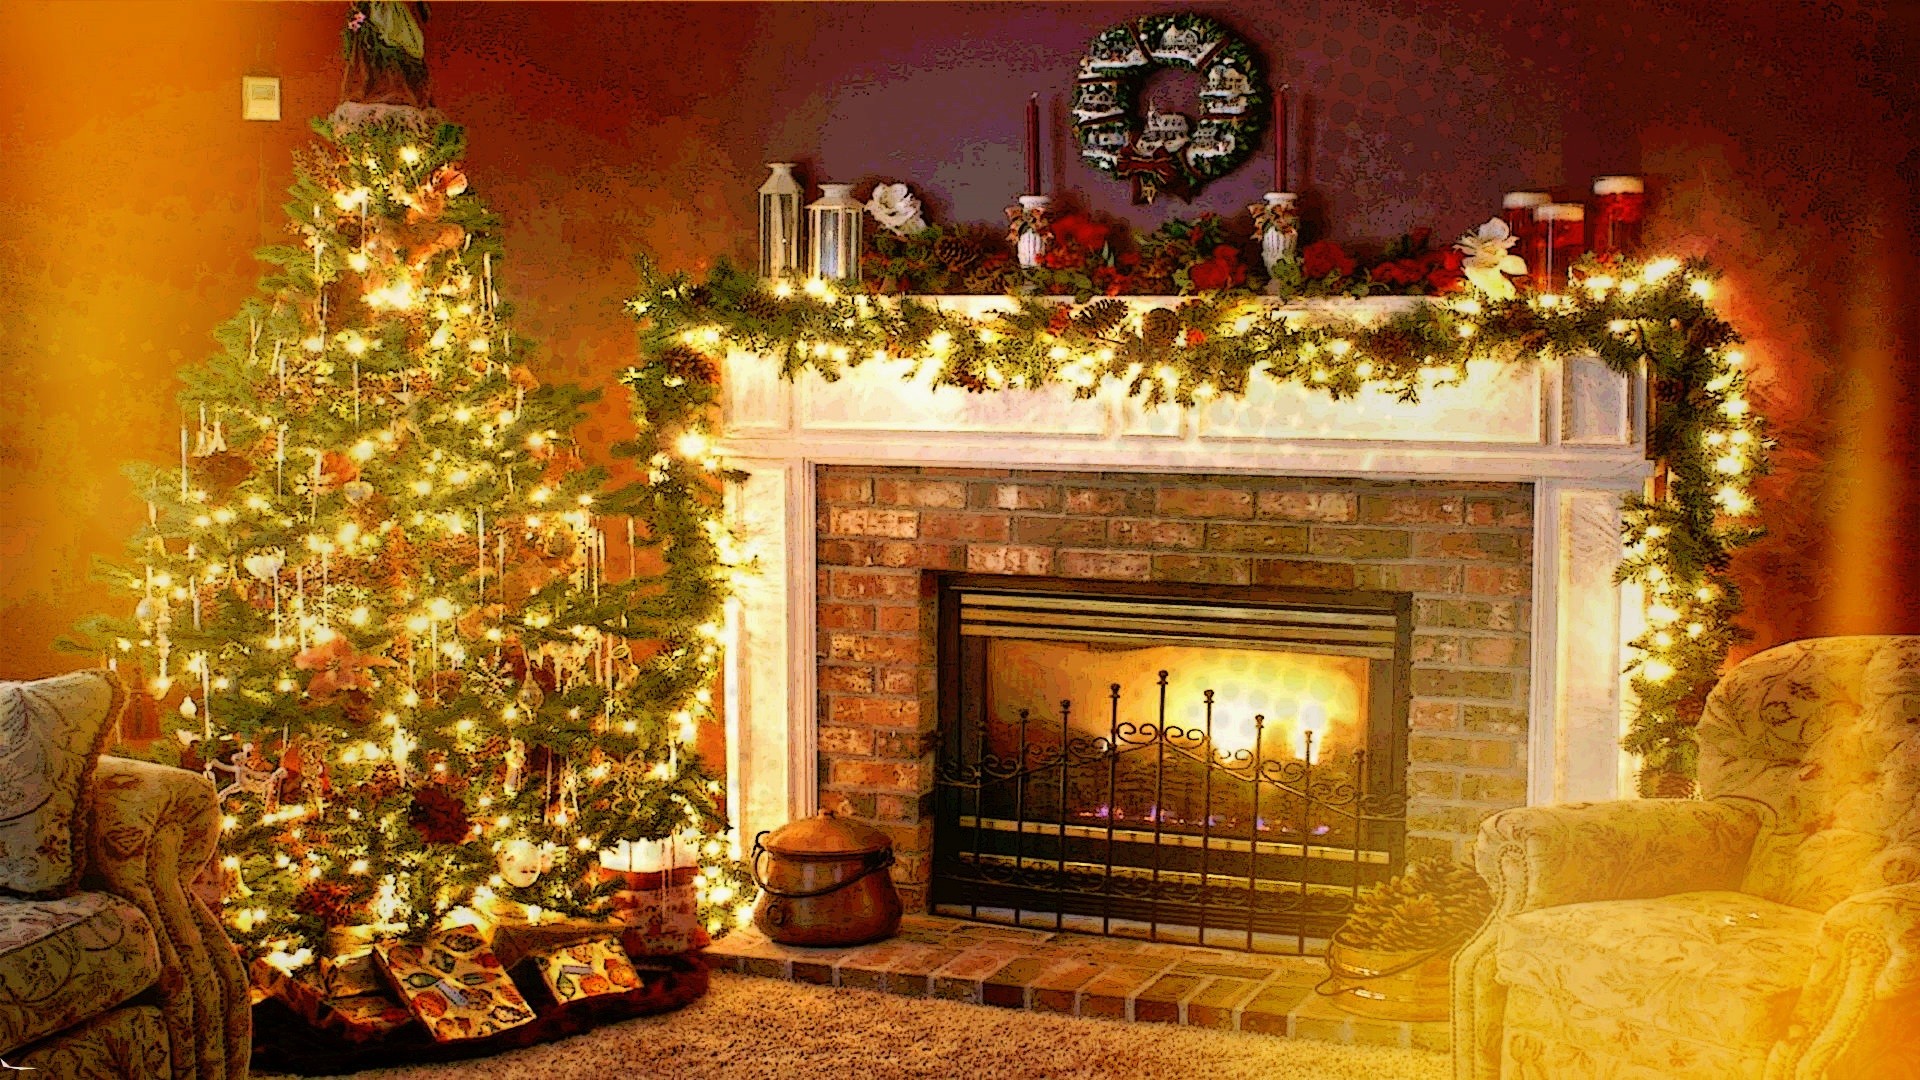 HD desktop wallpaper: Chair, Christmas, Holiday, Christmas Tree, Living Room,  Wreath, Fireplace download free picture #766935